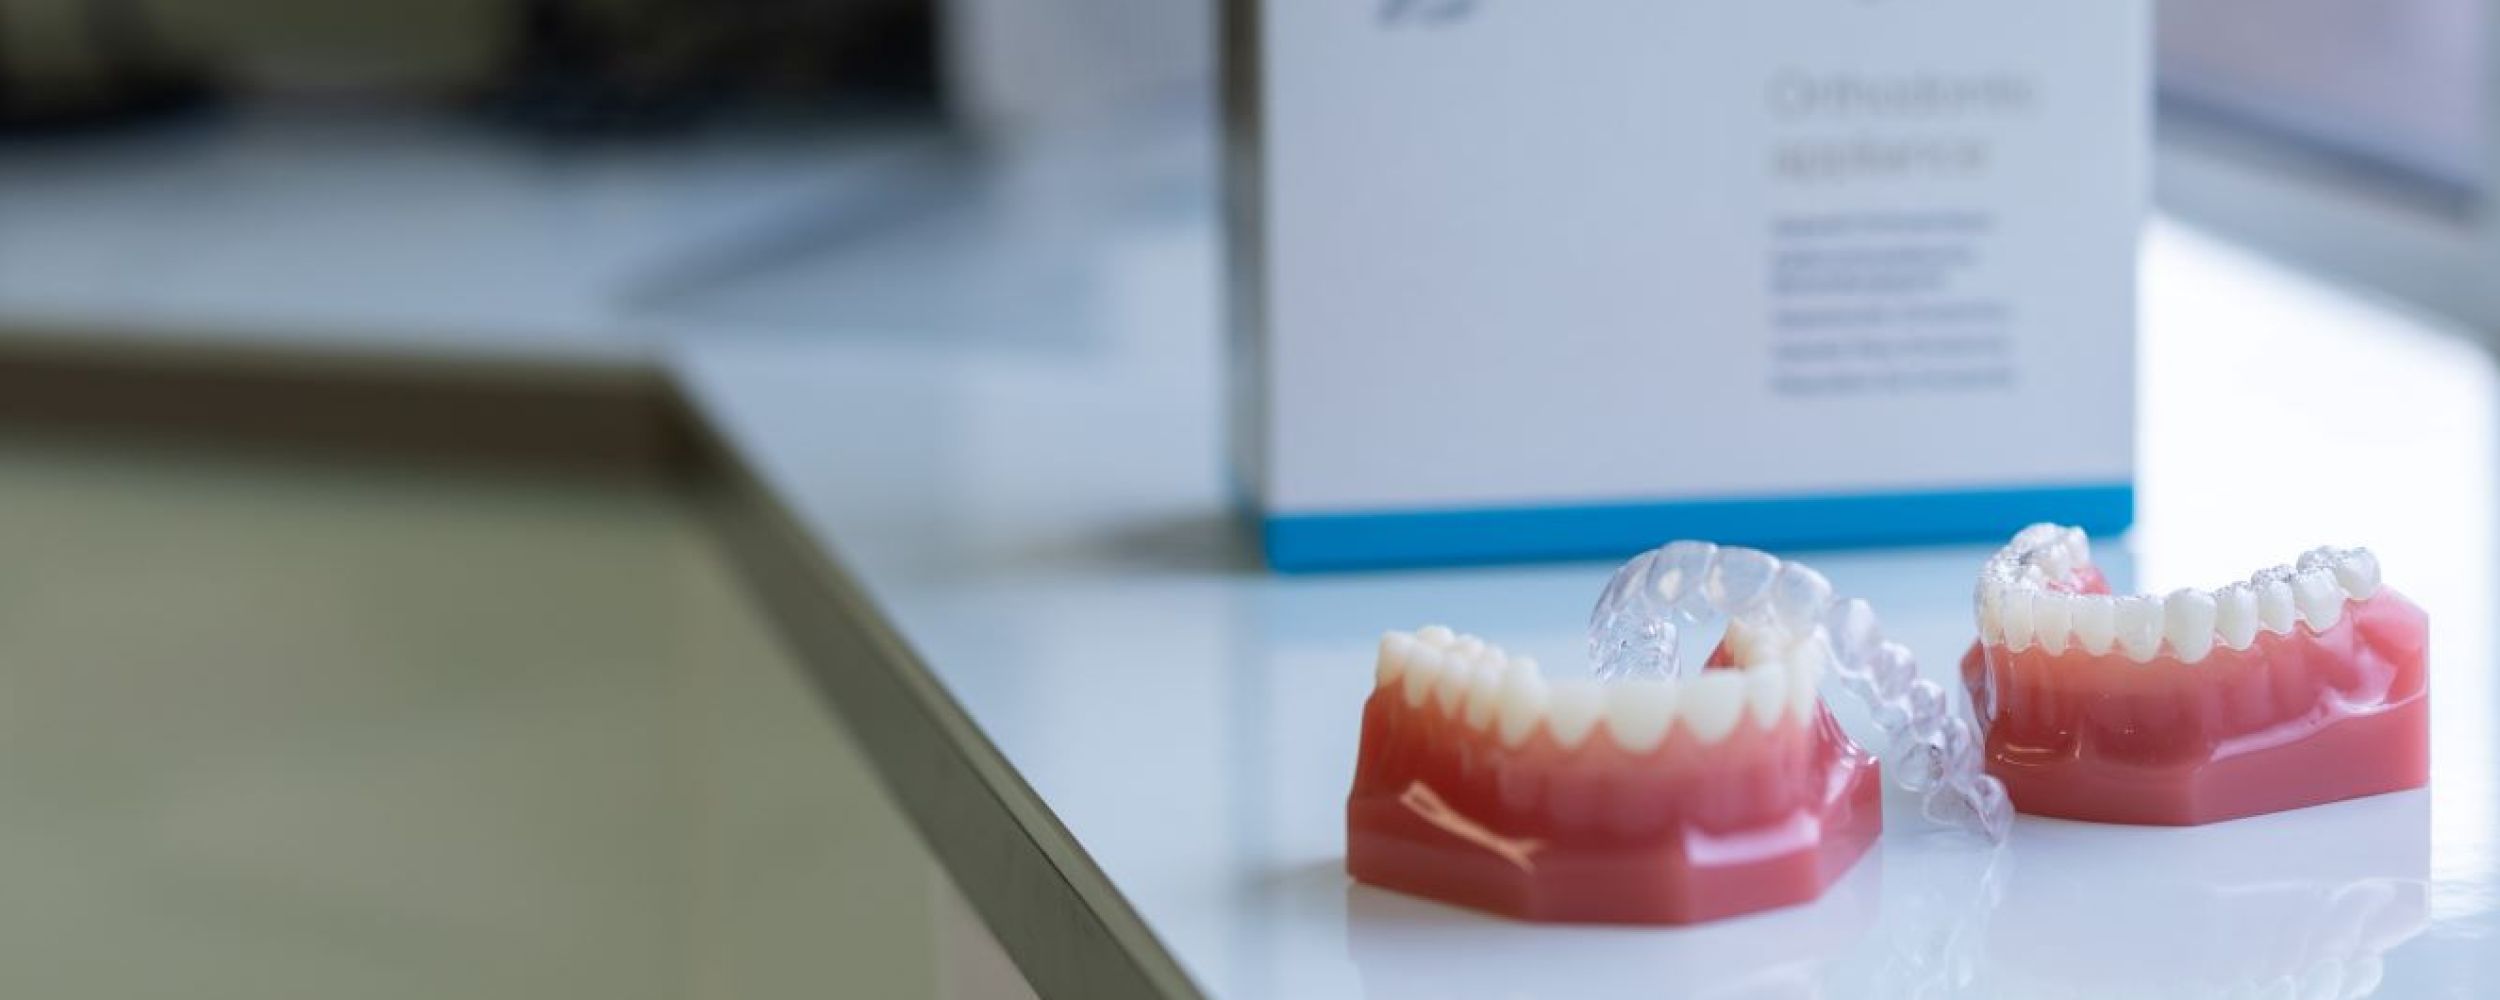 Over 1000 Invisalign patients treated